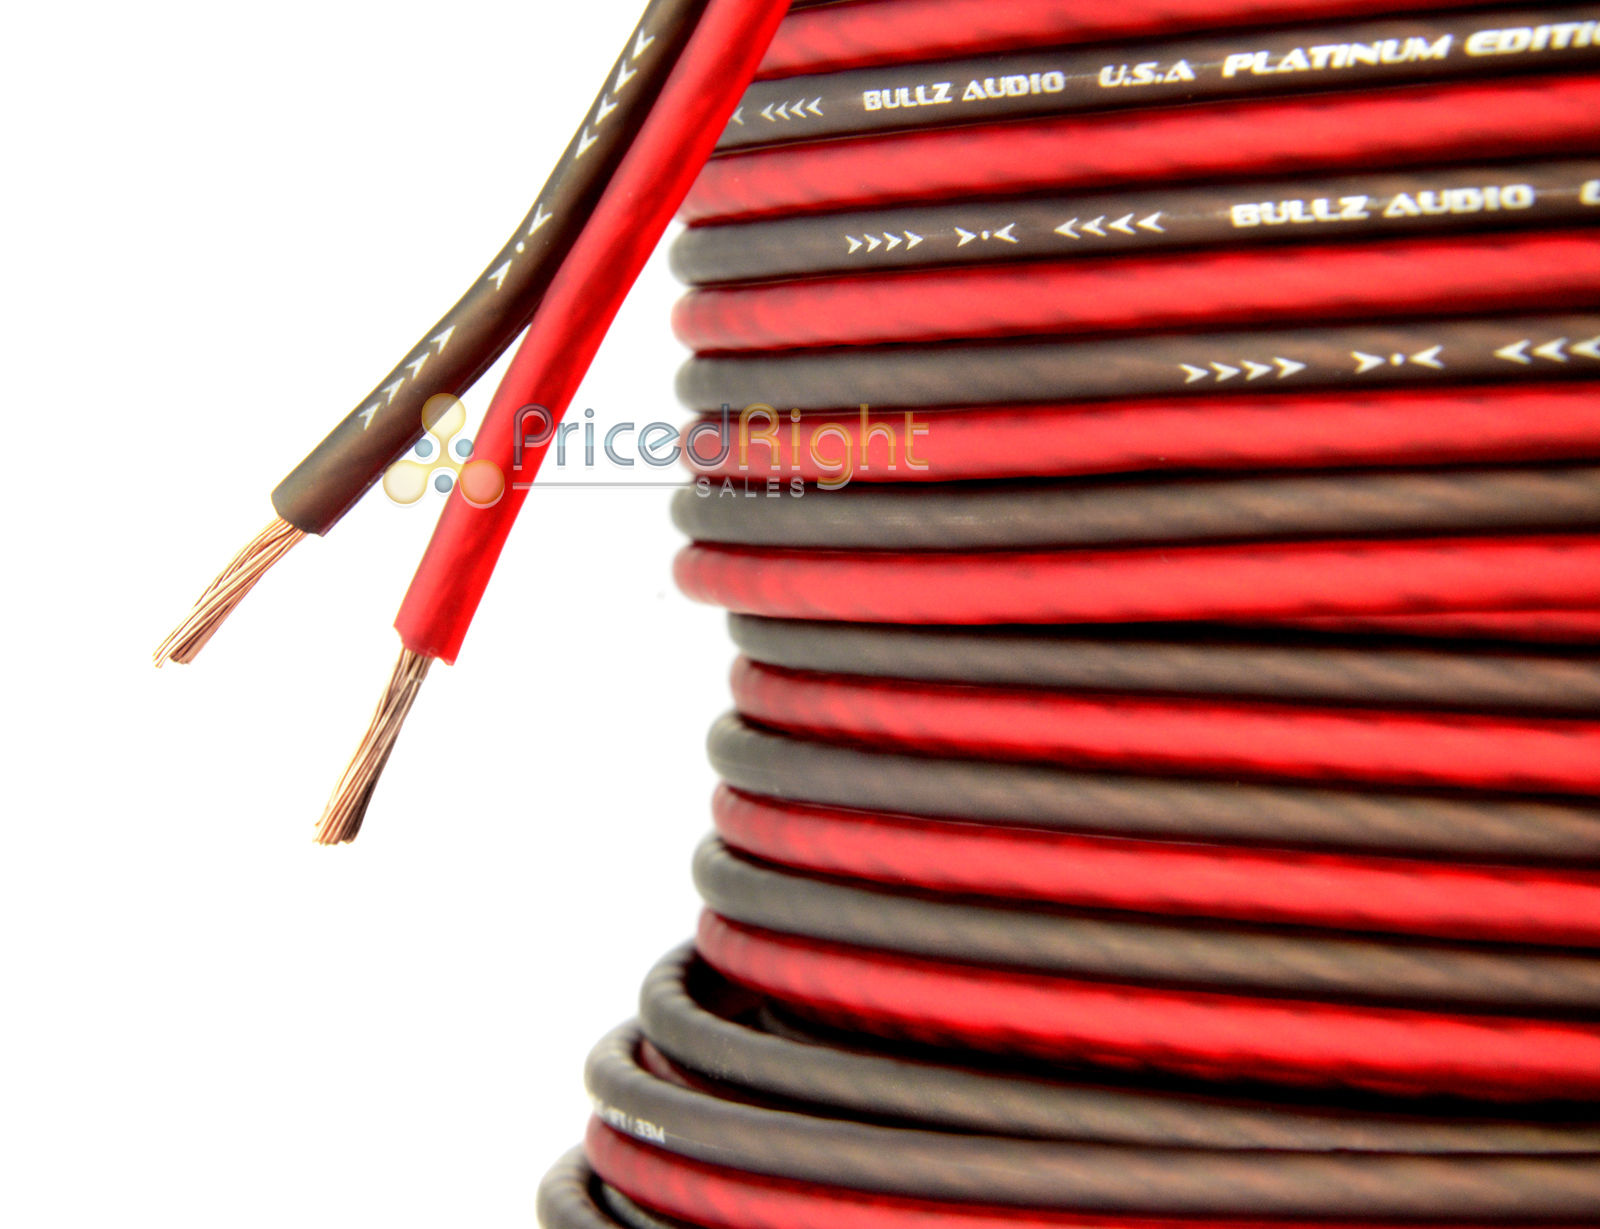 10 Ft 14 Gauge Professional Gauge Speaker Wire Zip Cable Car Home Audio AWG